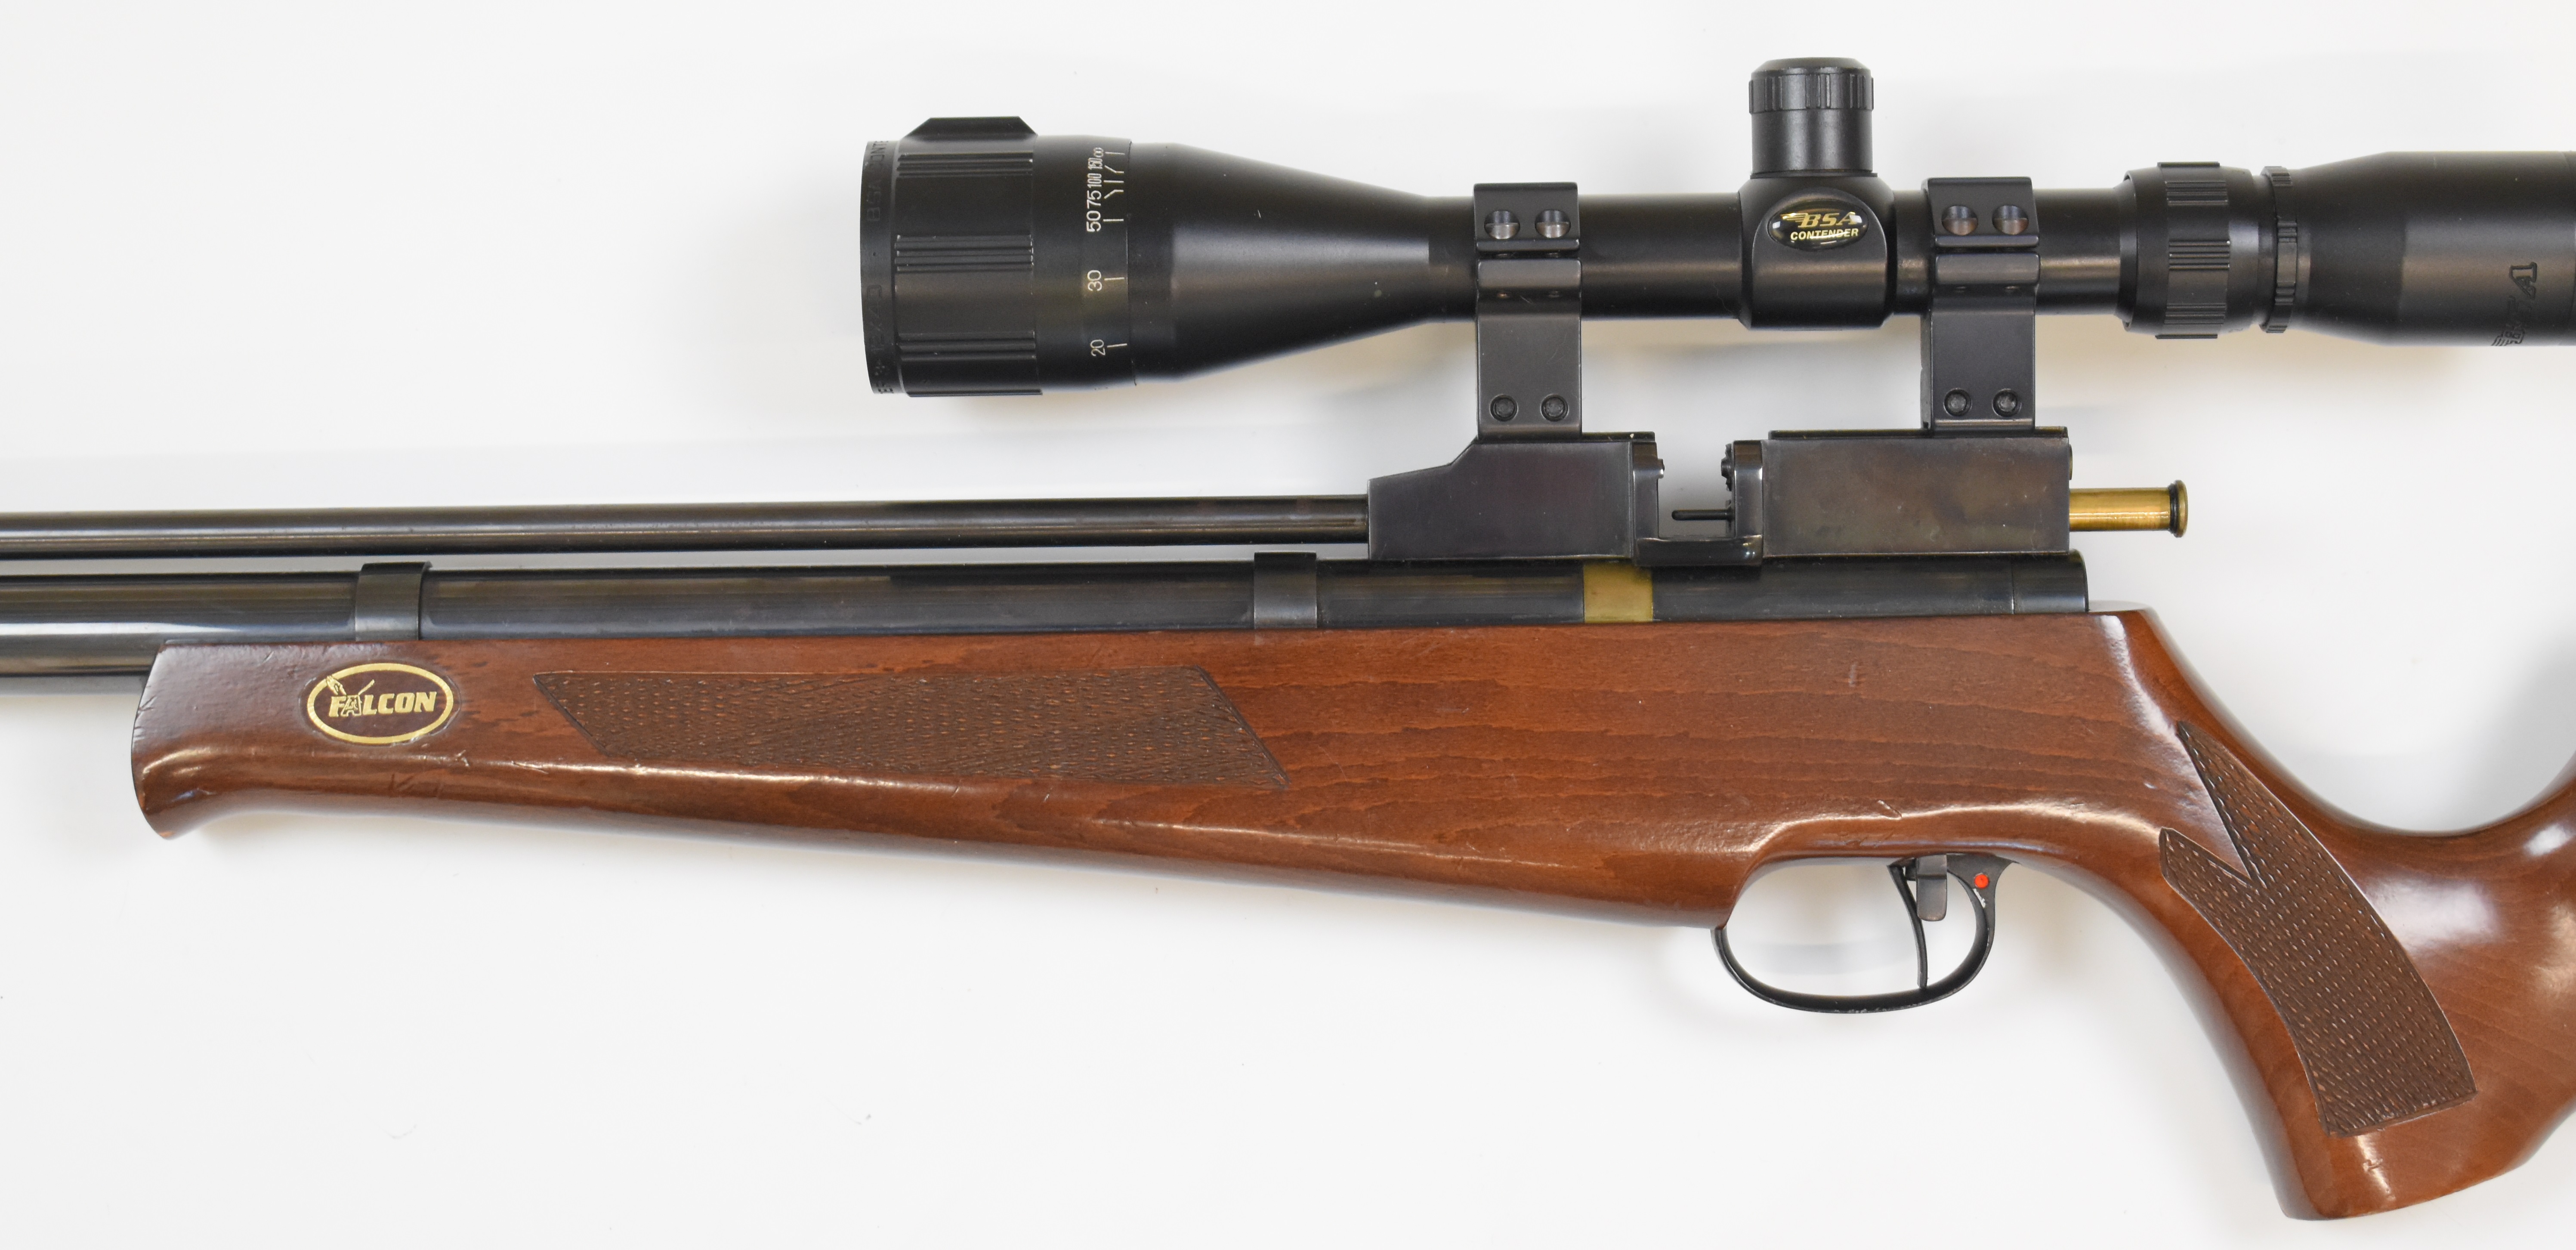 Titan/ Falcon .22 bolt-action PCP air rifle, probably by John Bowkett, with two 8-shot magazines, - Image 8 of 10